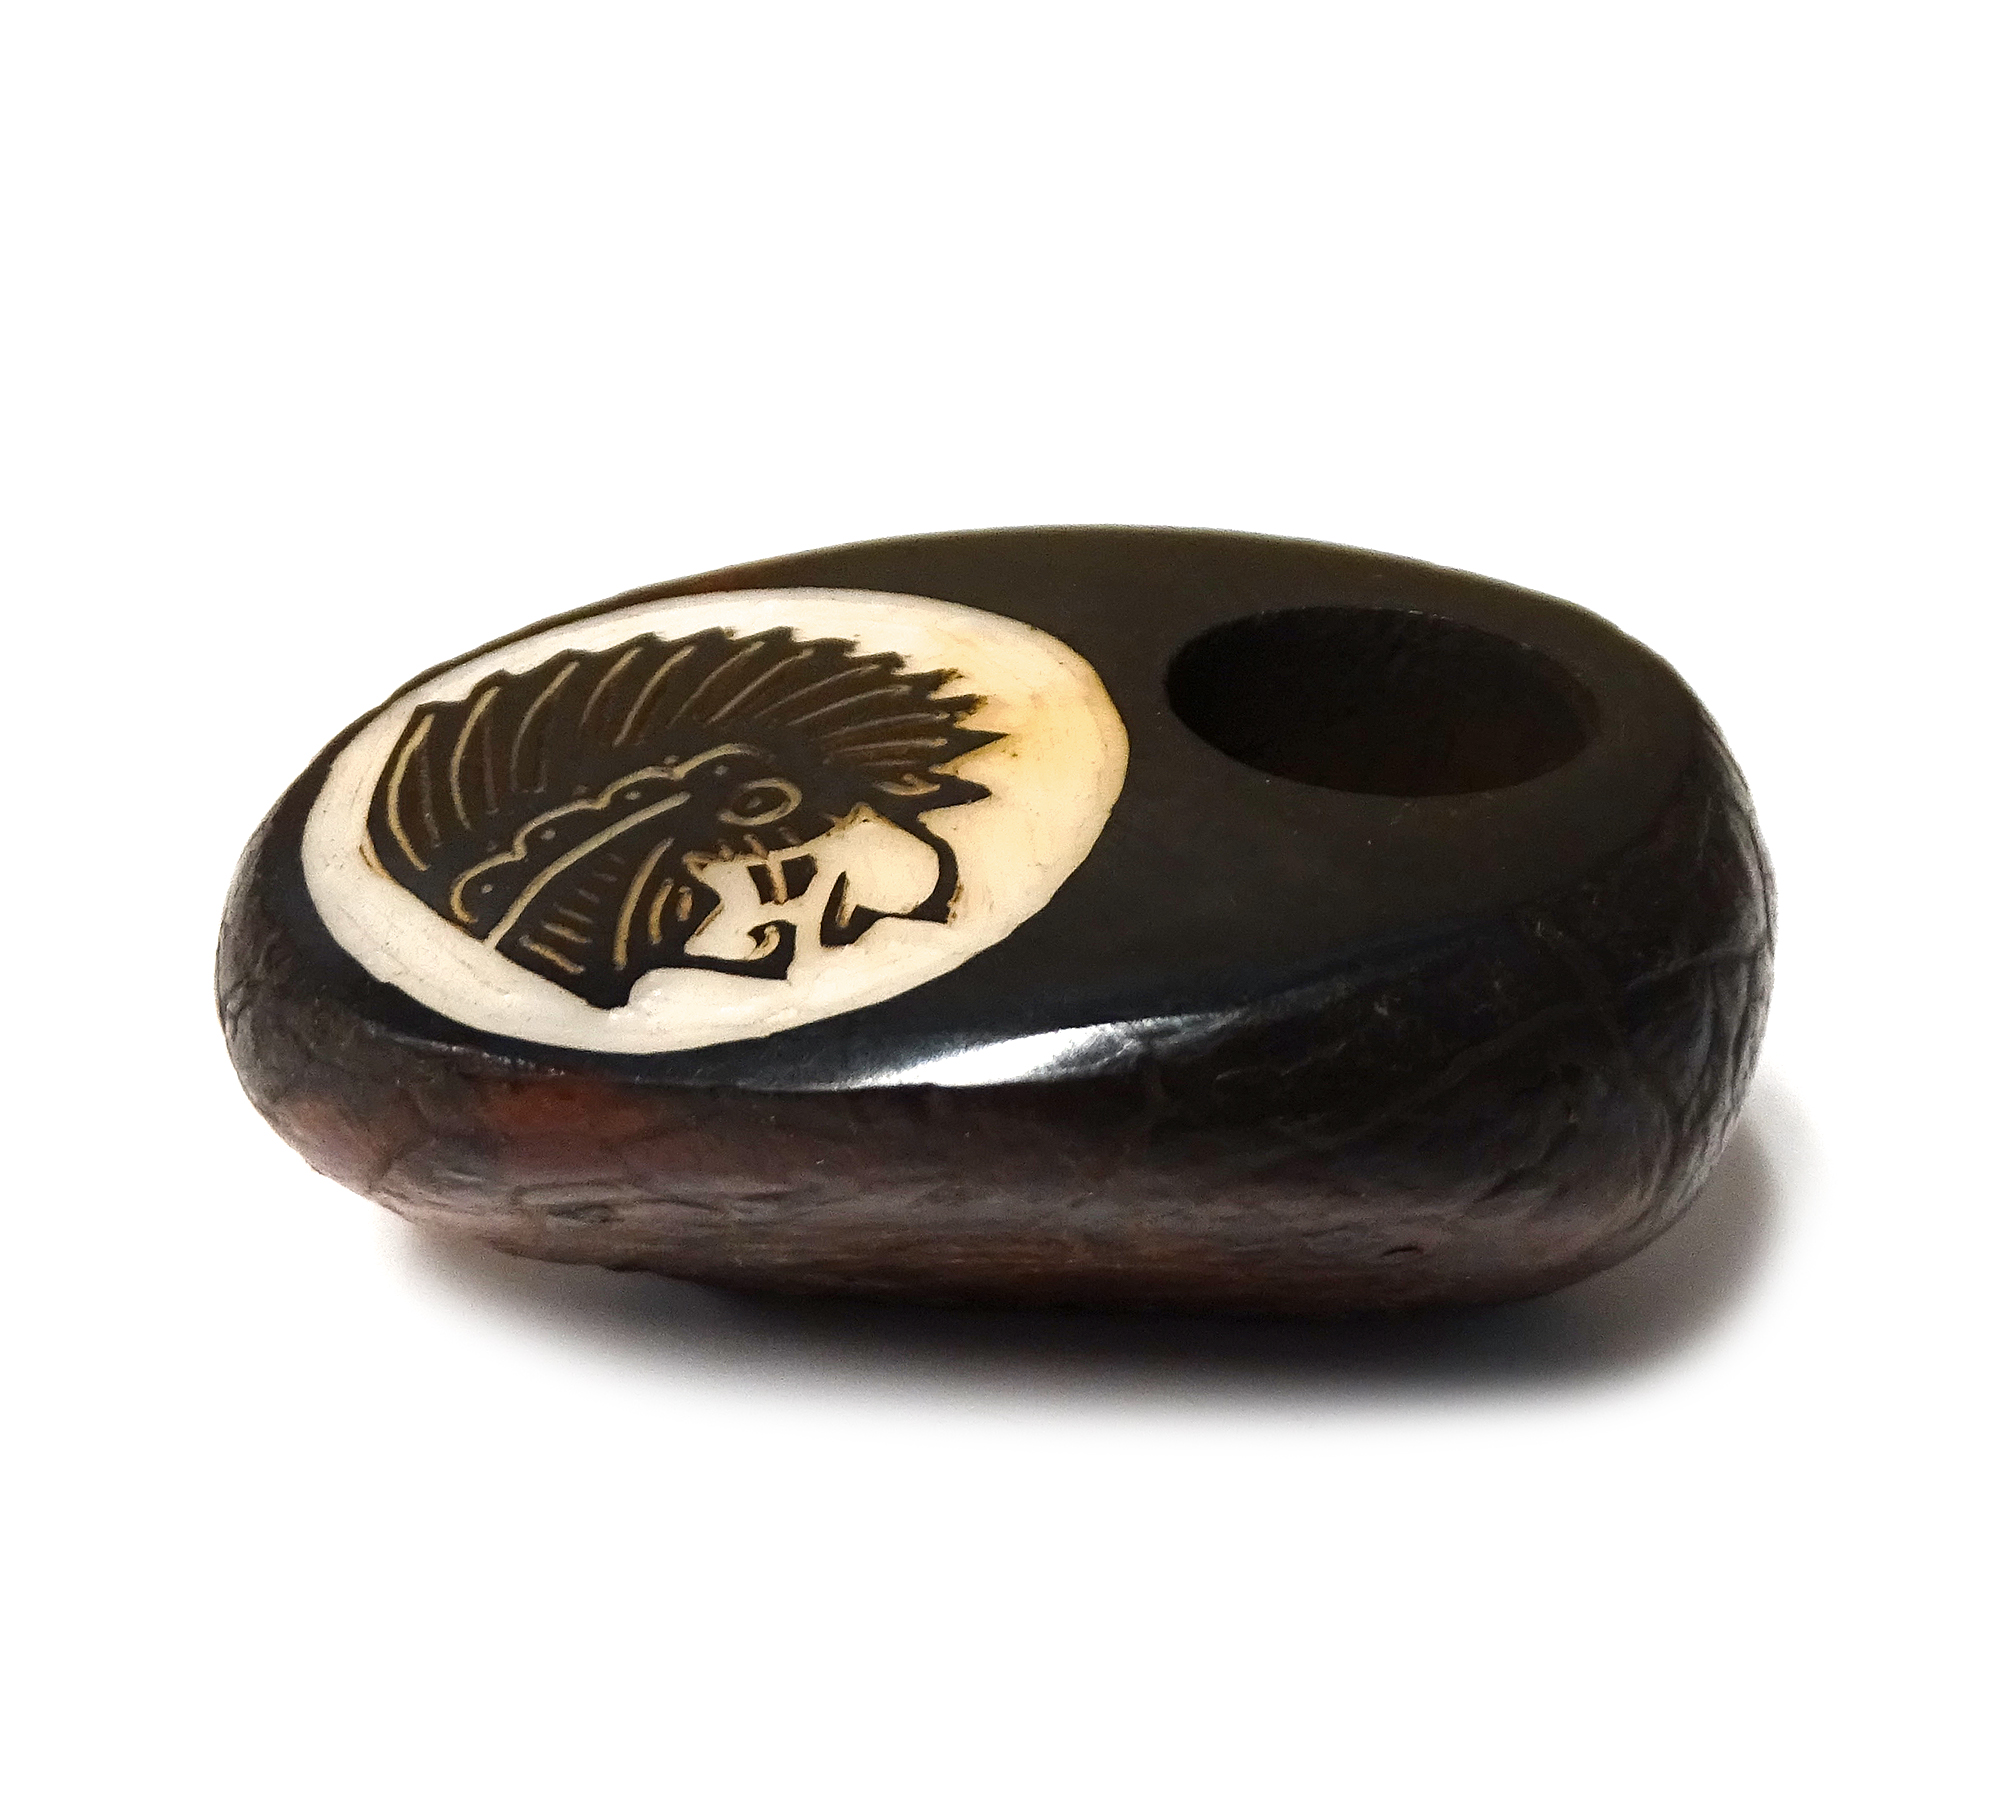 Handcarved tobacco smoking mini round natural tagua nut hand pipe bowl of a Native American Indian Chief head profile.